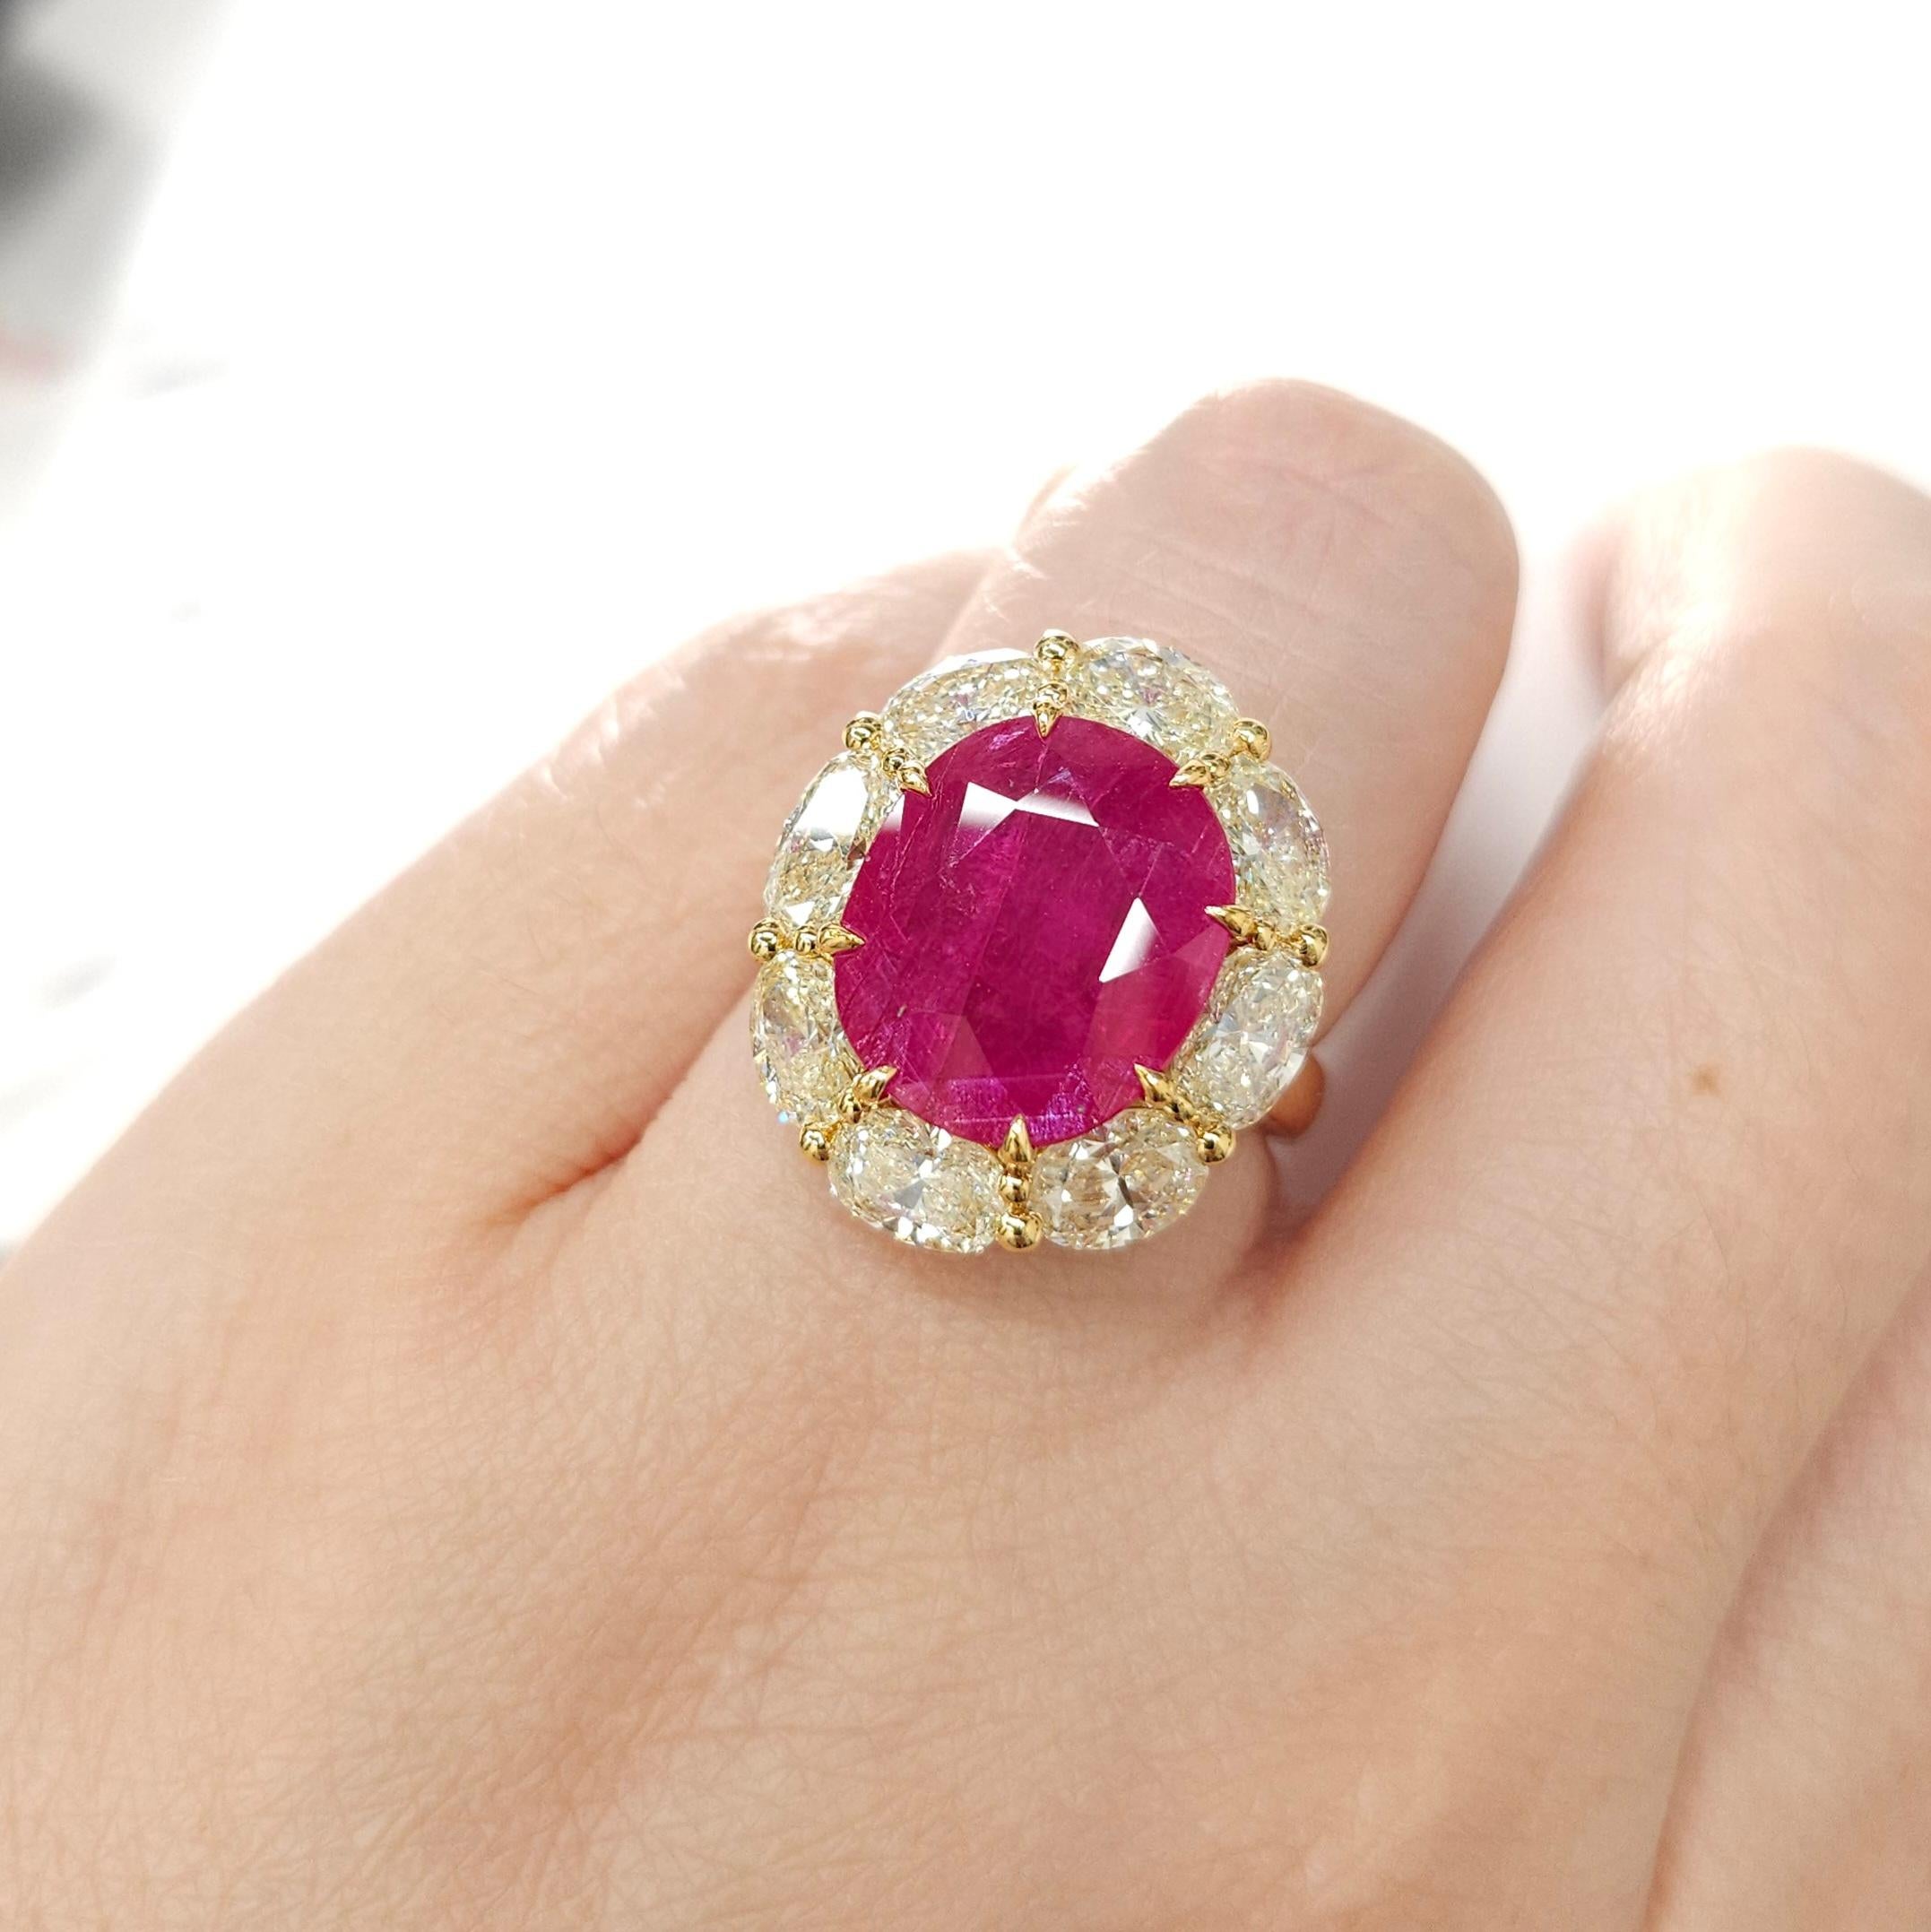 IGI Certified 6.53 Carat Ruby & 3.71 Carat Oval Diamond Ring in 18K Yellow Gold For Sale 3